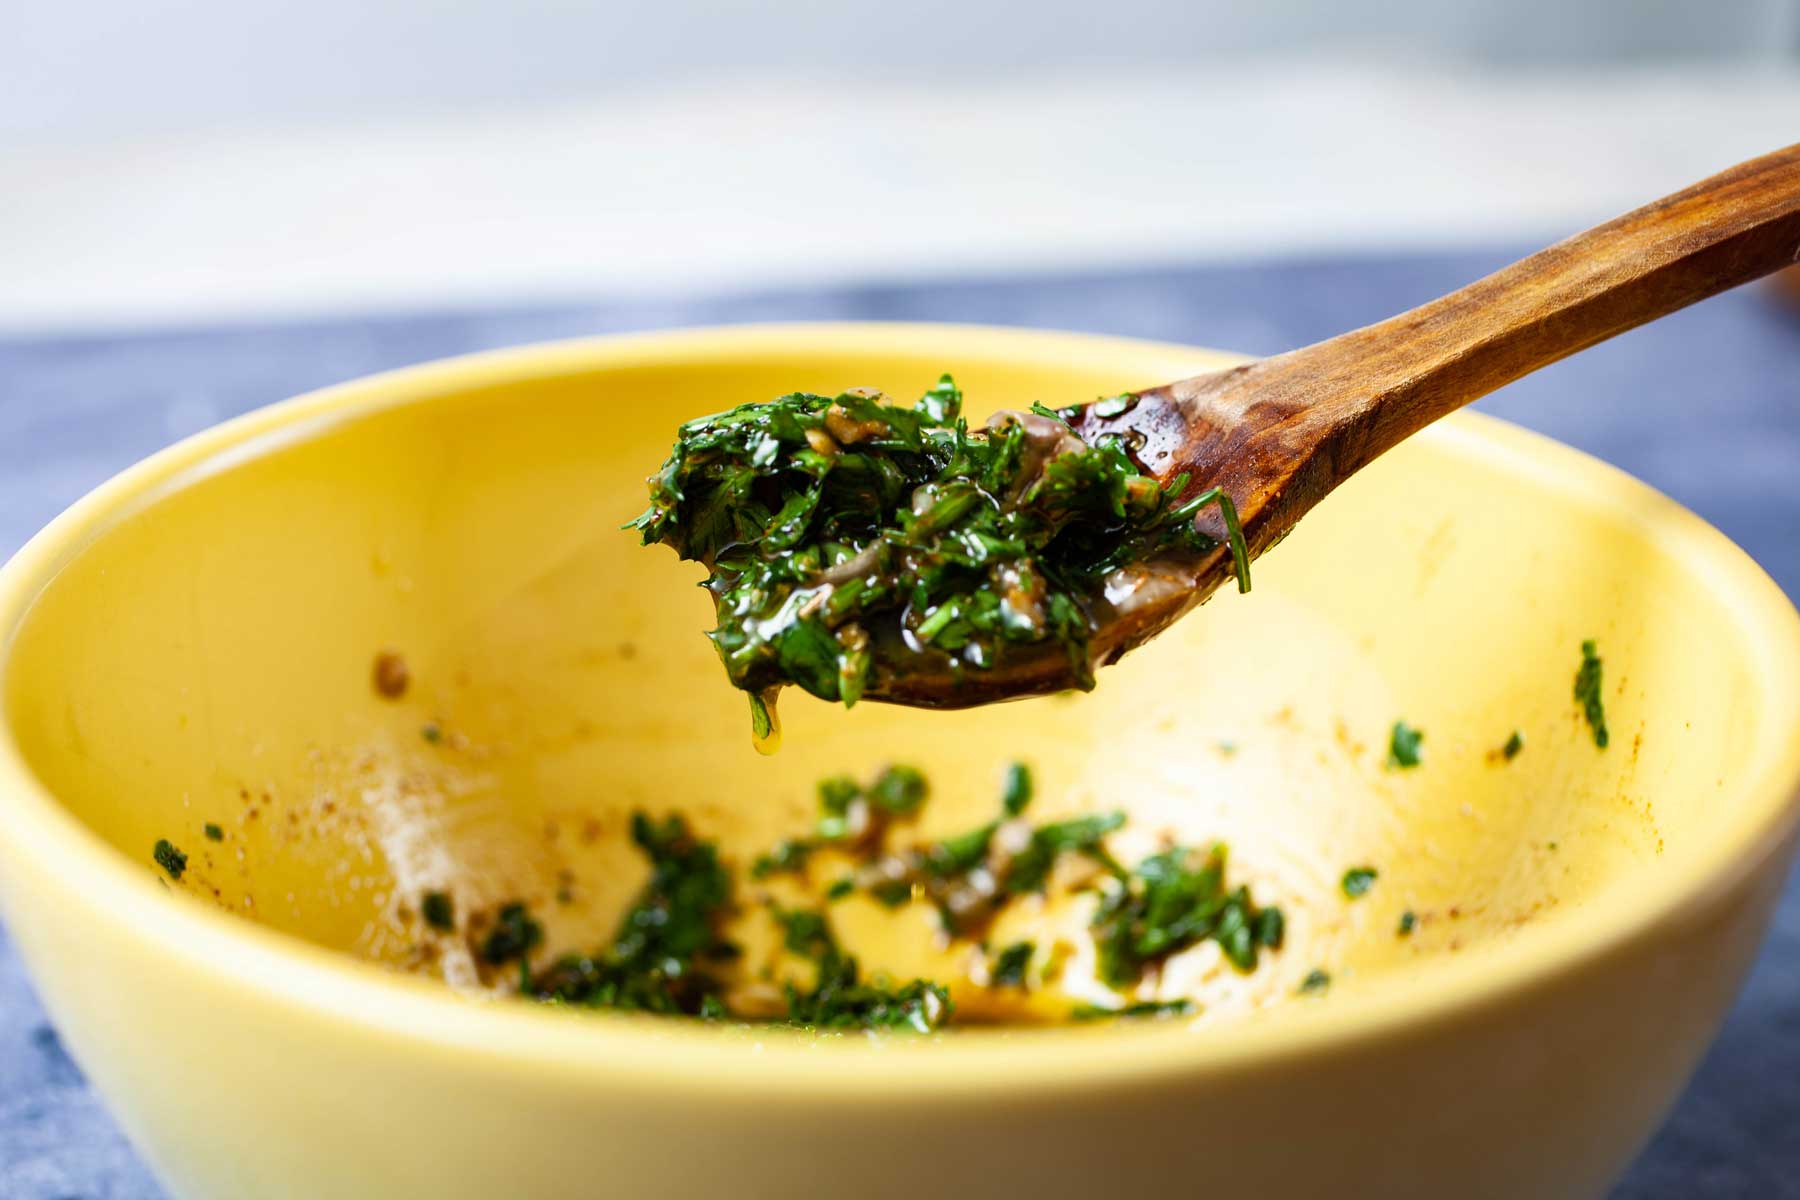 A wooden spoon lifted over a bowl with chimichurri sauce.